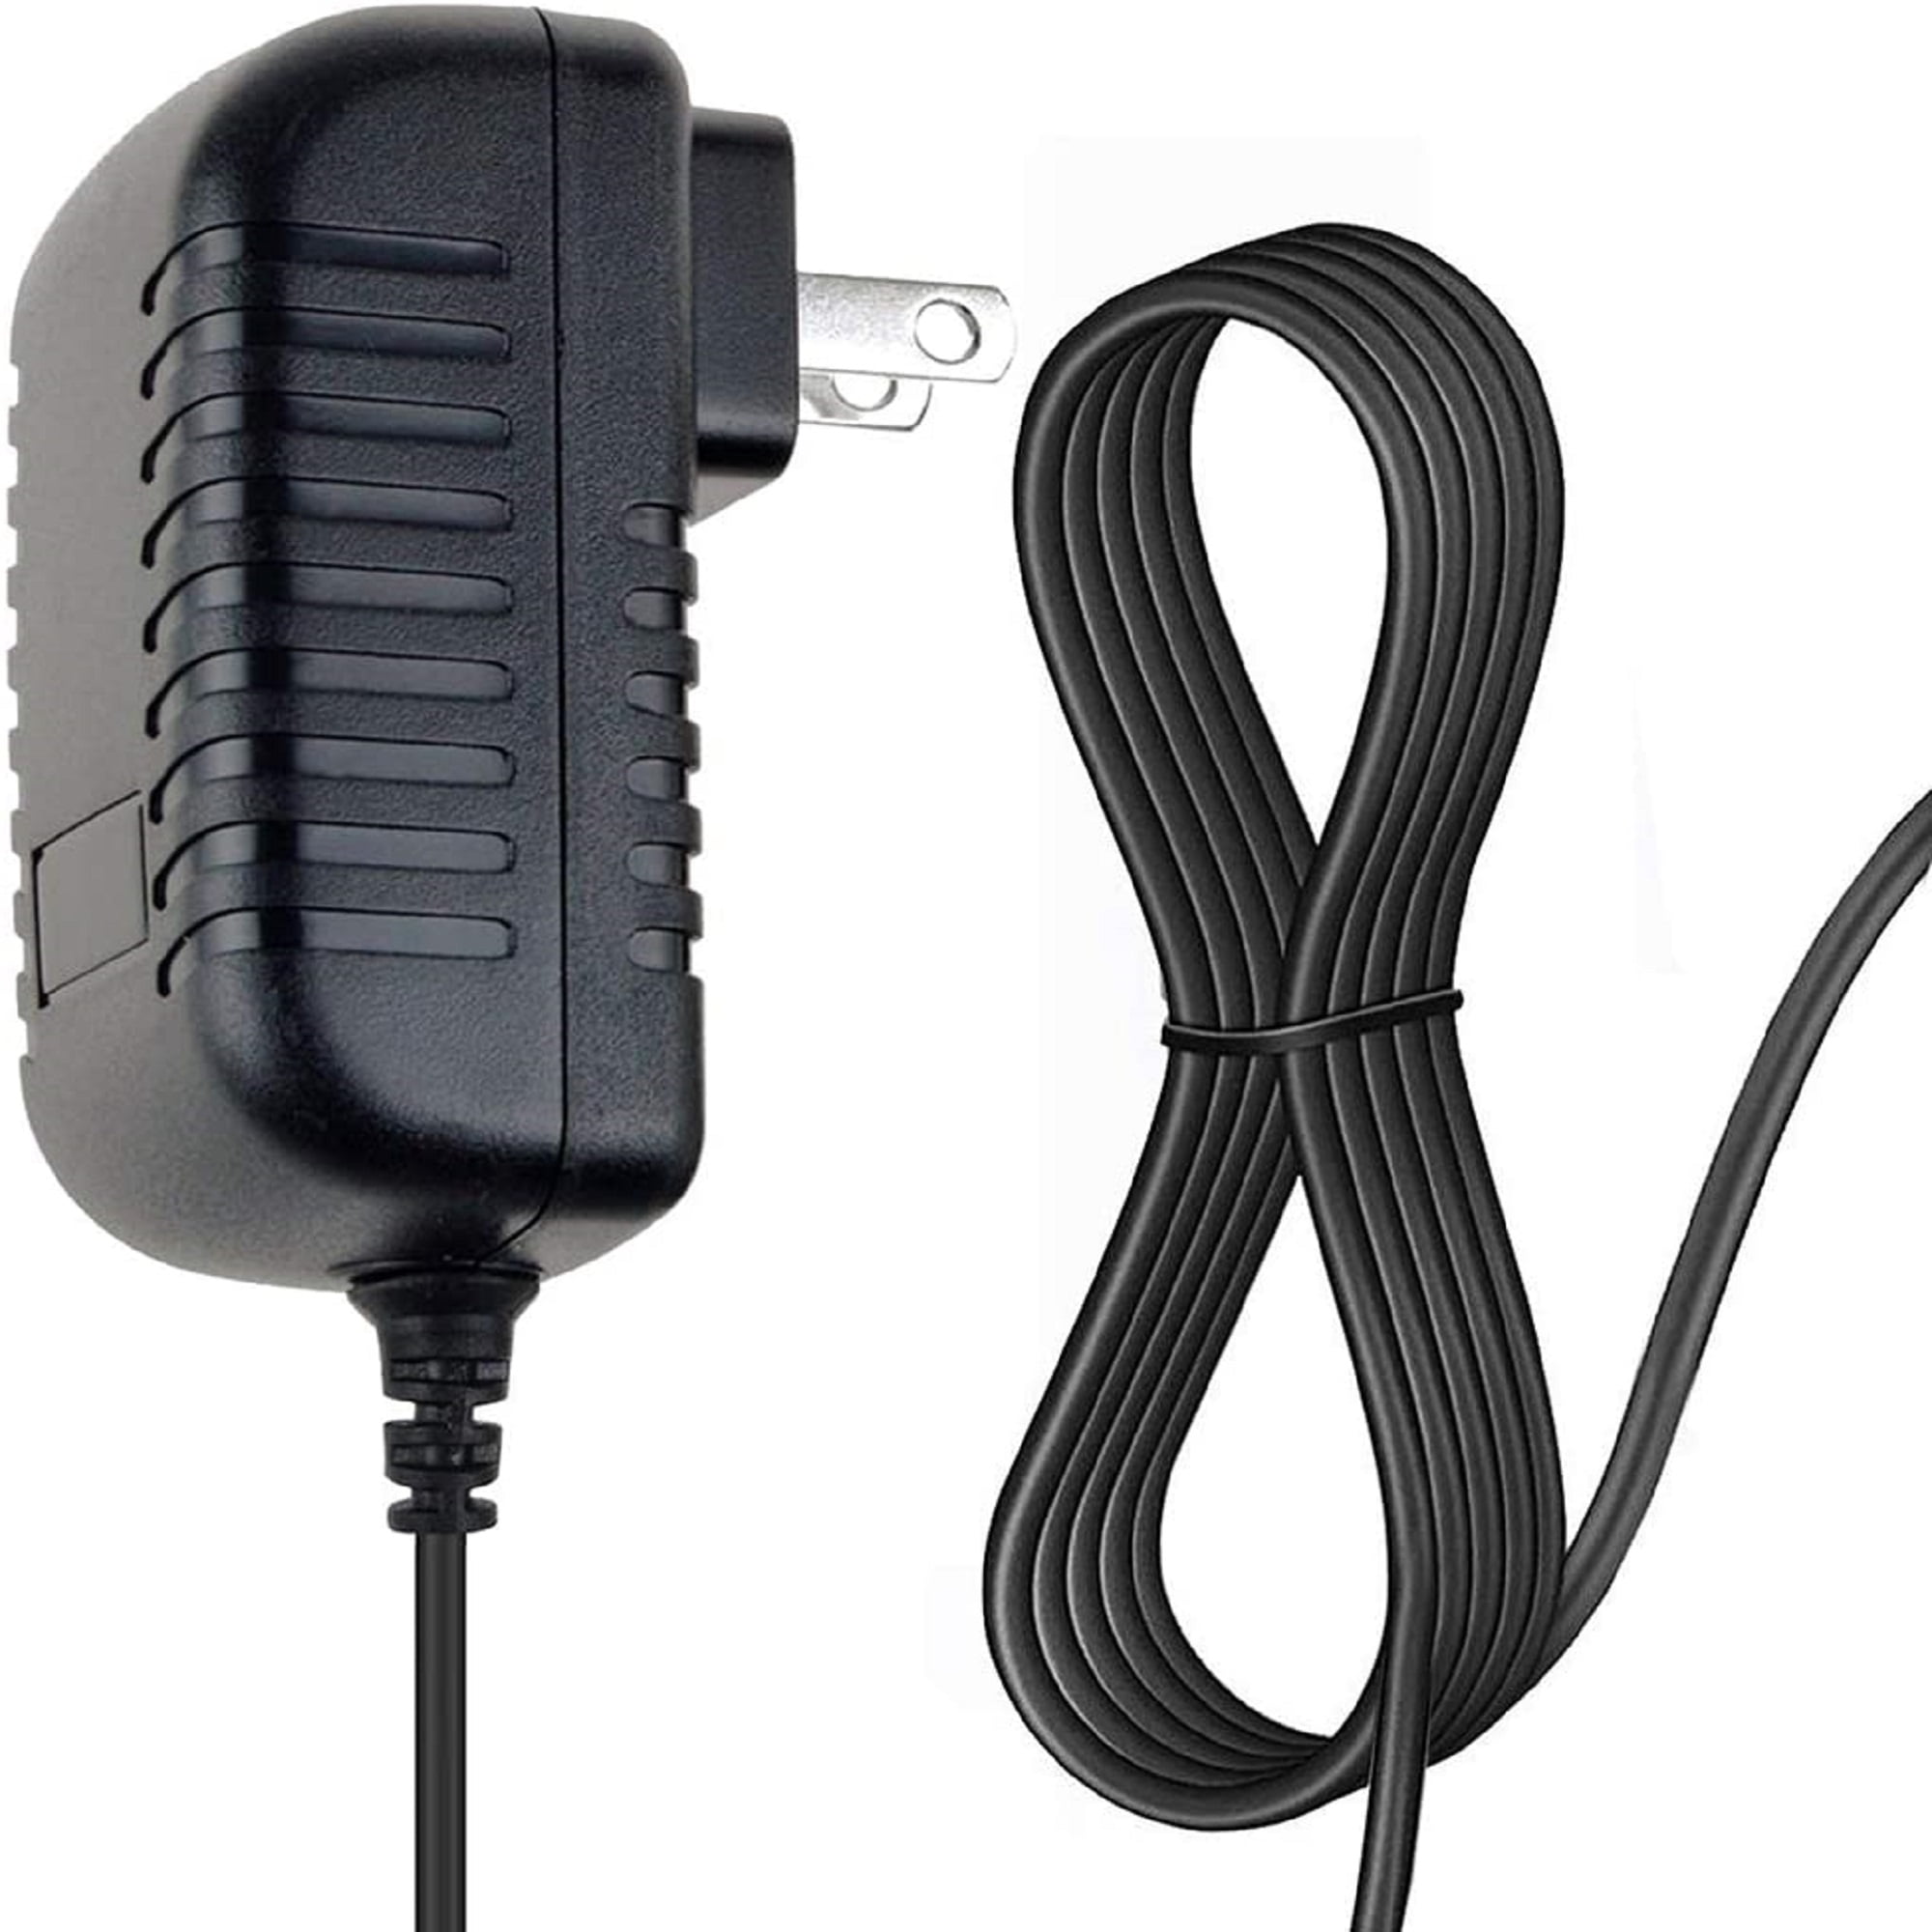 20 x 5V 2A AC/DC Power Supply Adapter with 2.5mm x 5.5mm Tip Center 